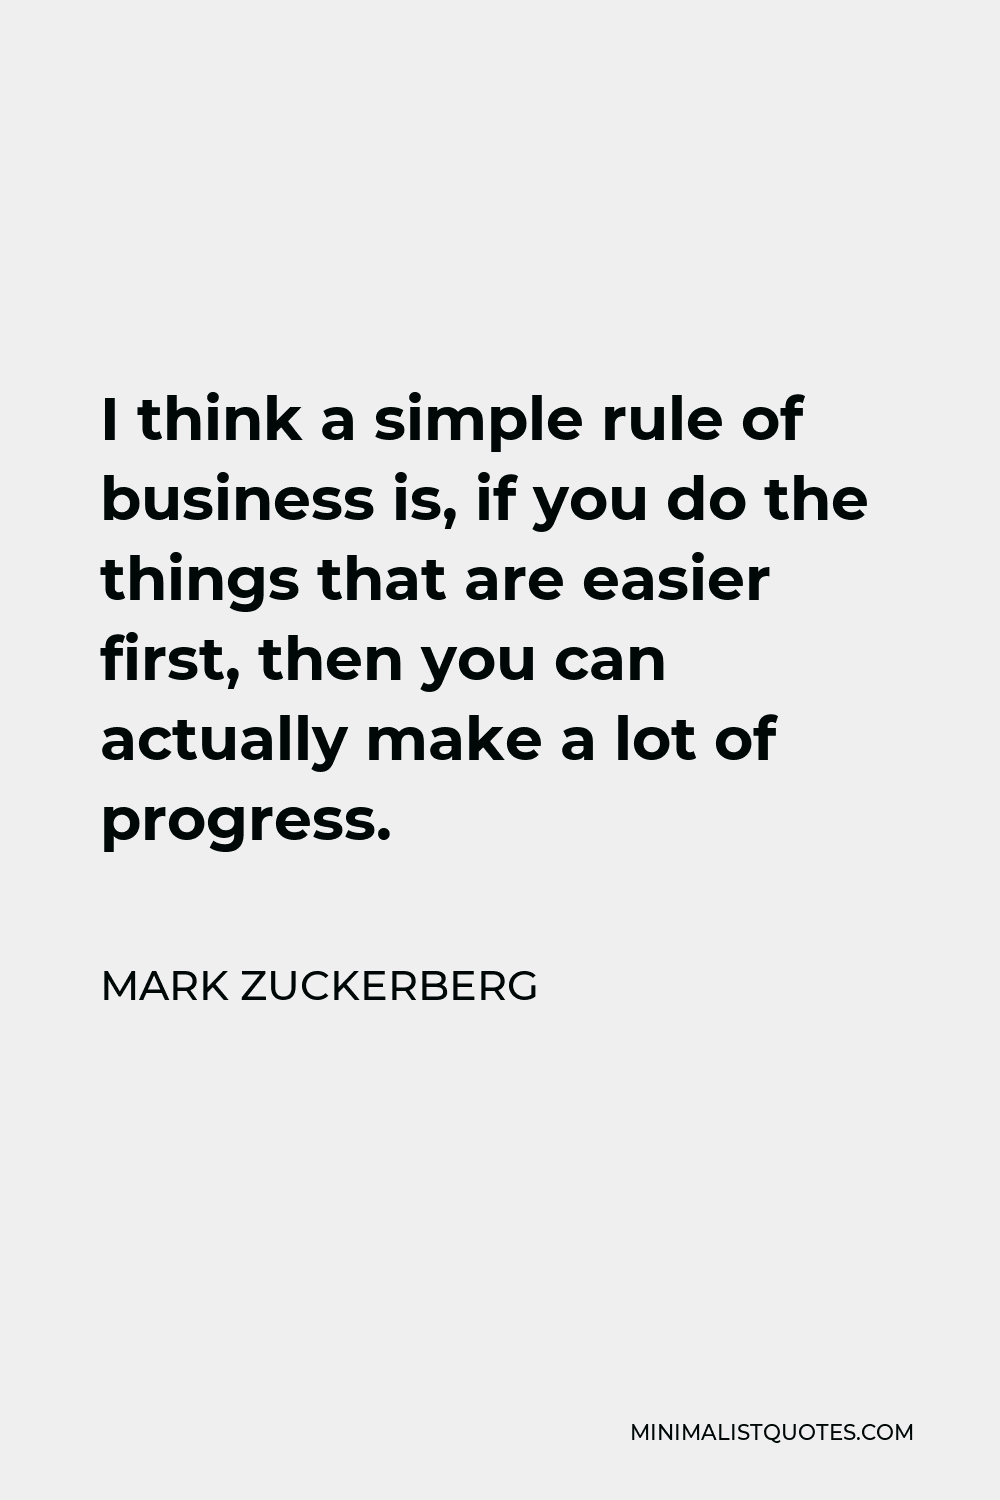 Mark Zuckerberg Quote - I think a simple rule of business is, if you do the things that are easier first, then you can actually make a lot of progress.